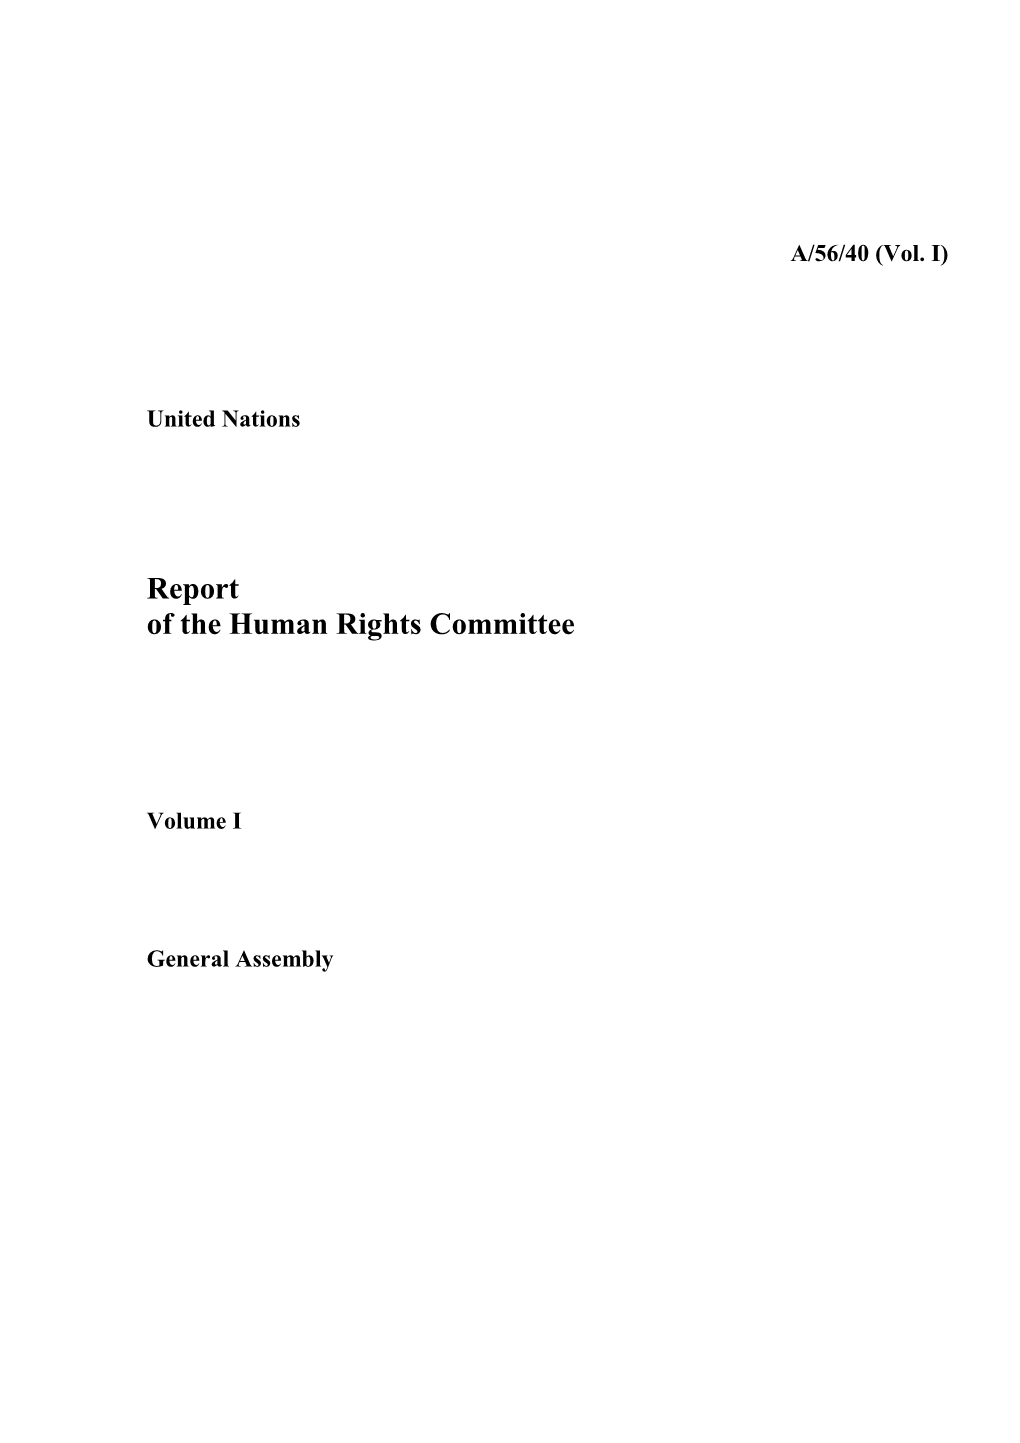 Of the Human Rights Committee